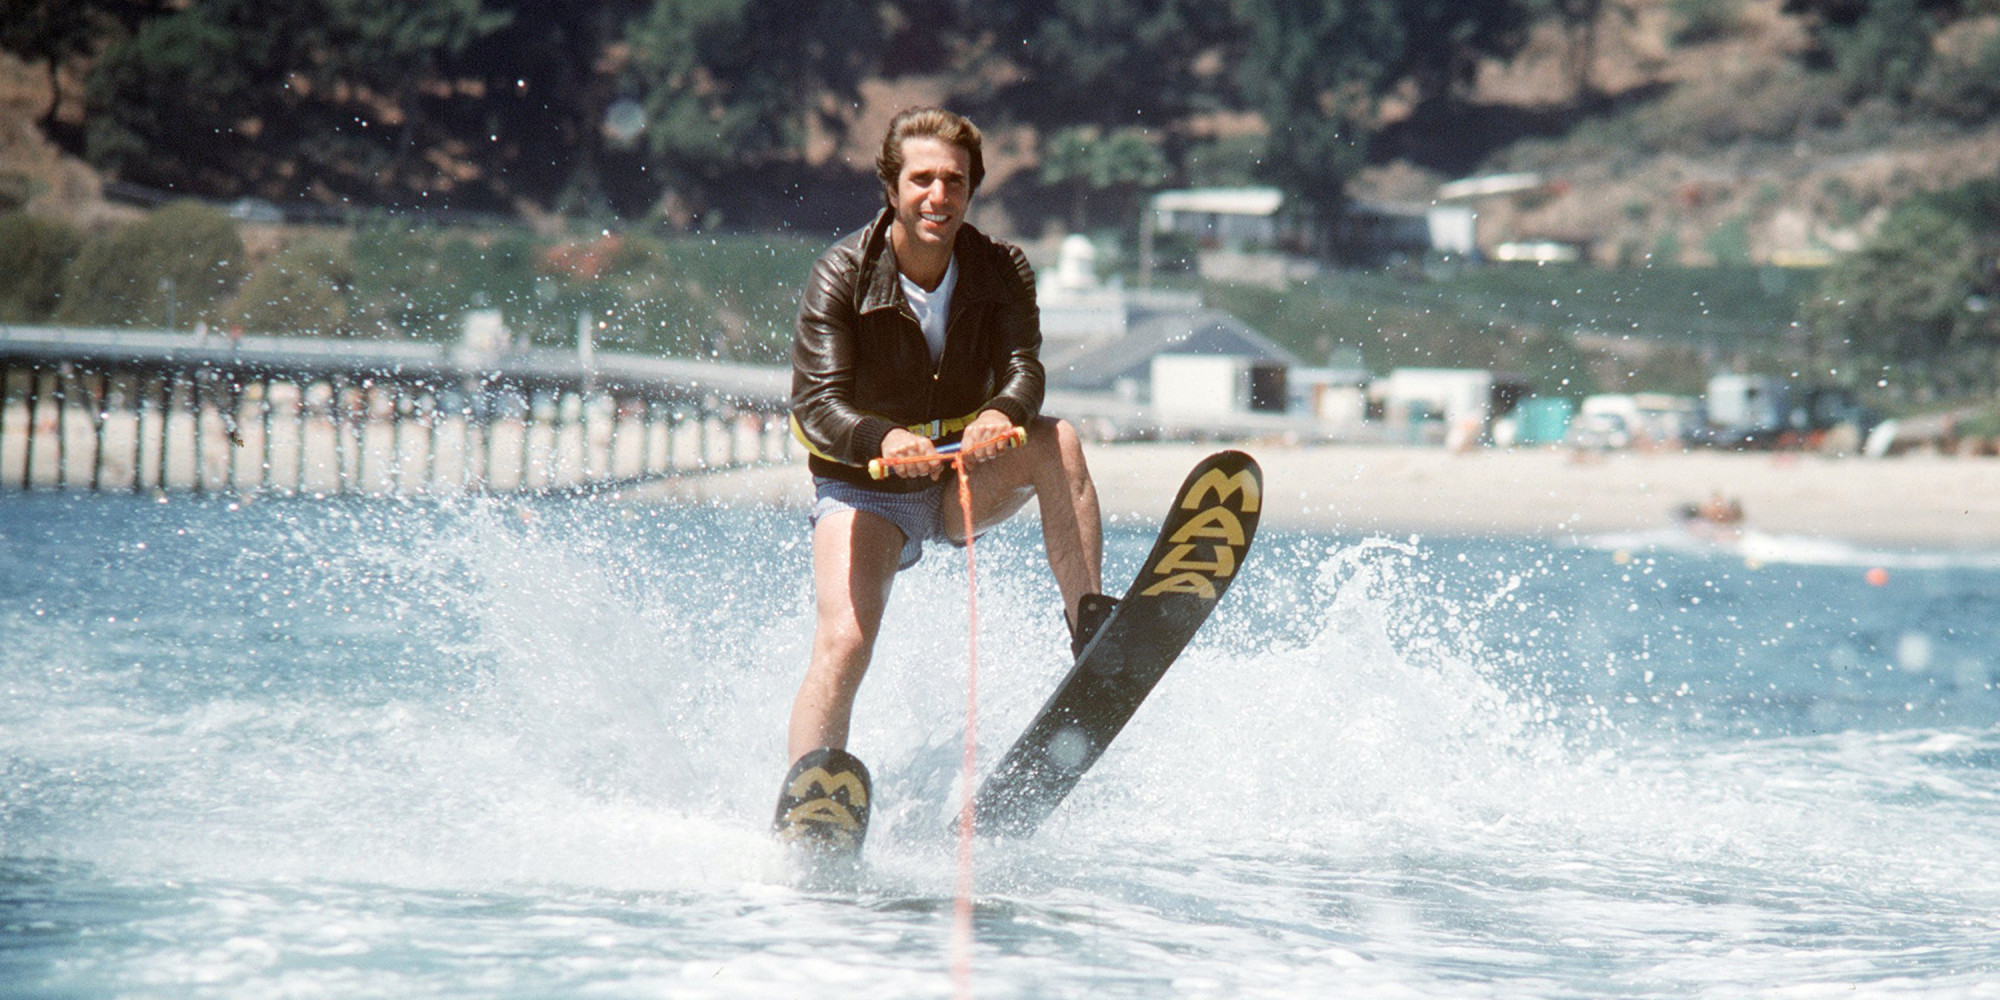 Fonzie jumps the shark on Happy Days